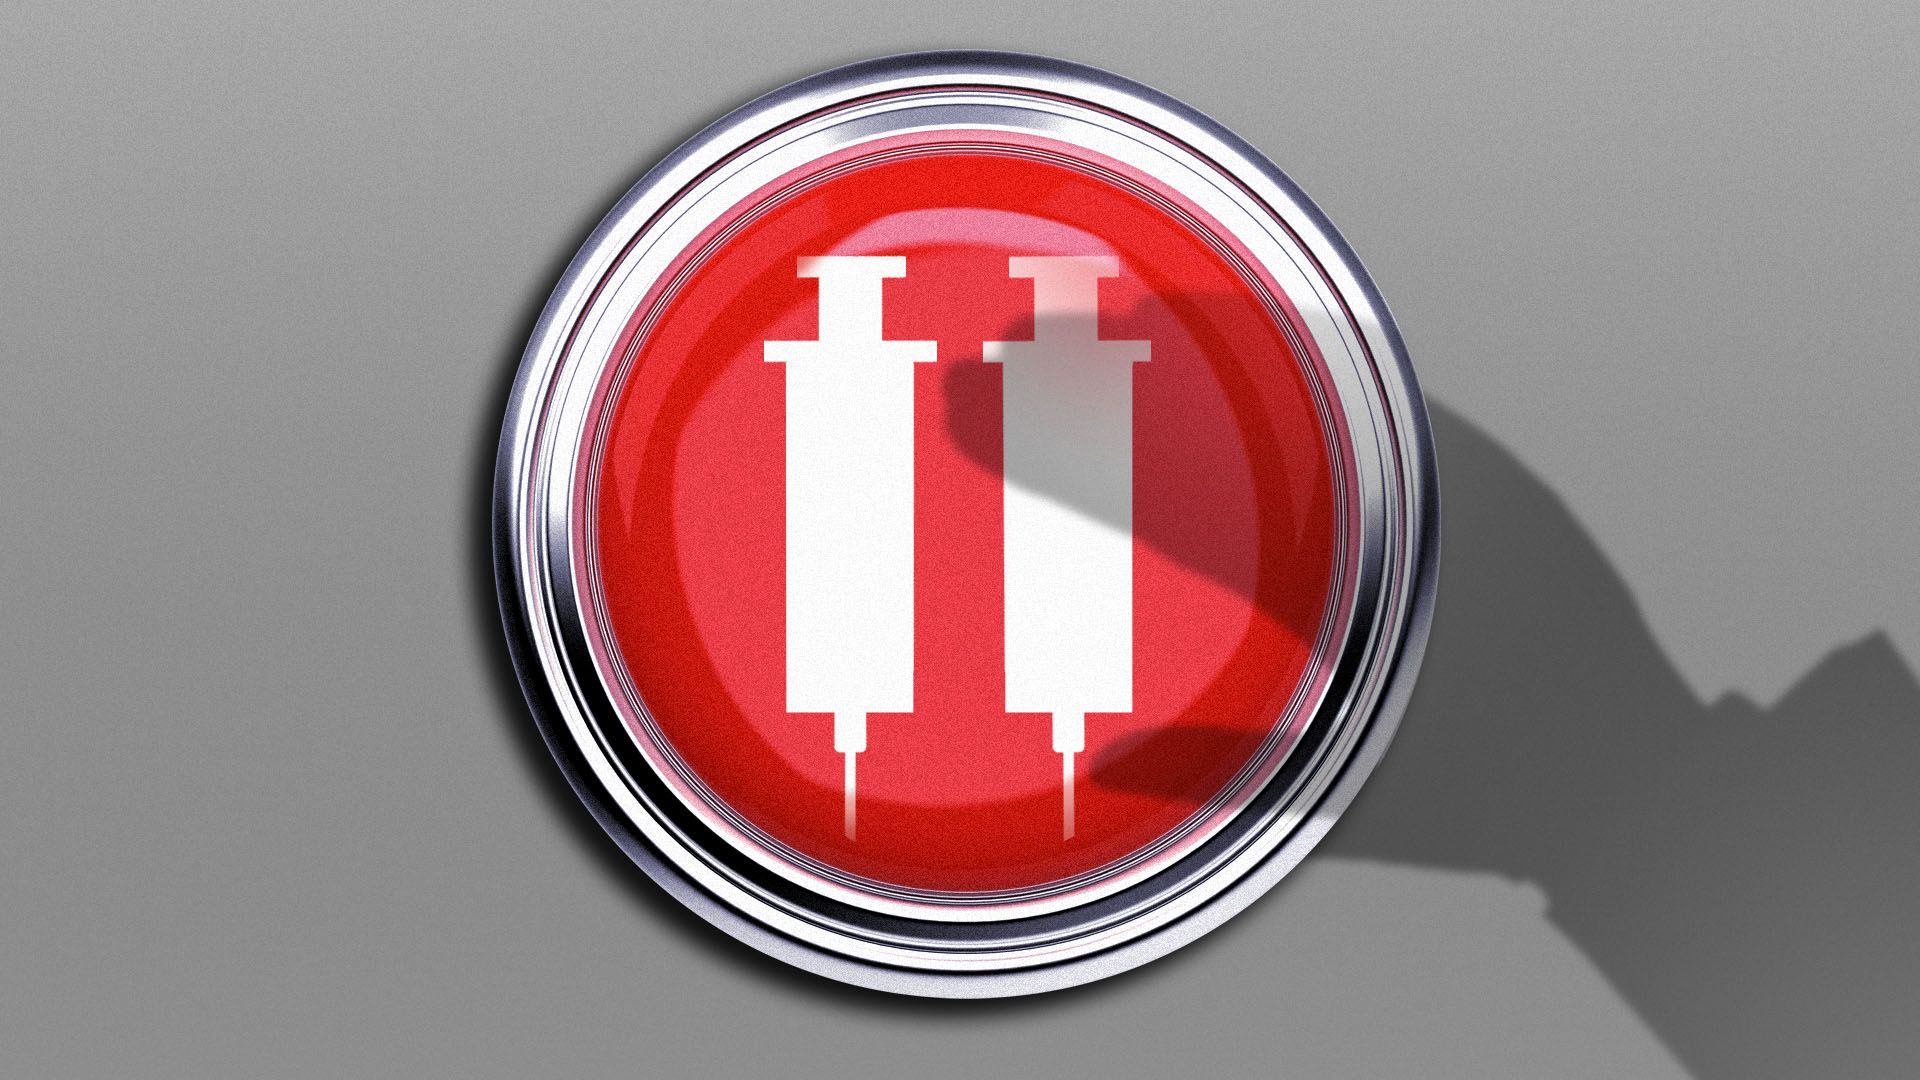 Illustration of a shadow hovering over a giant red button with syringes in the shape of a pause symbol